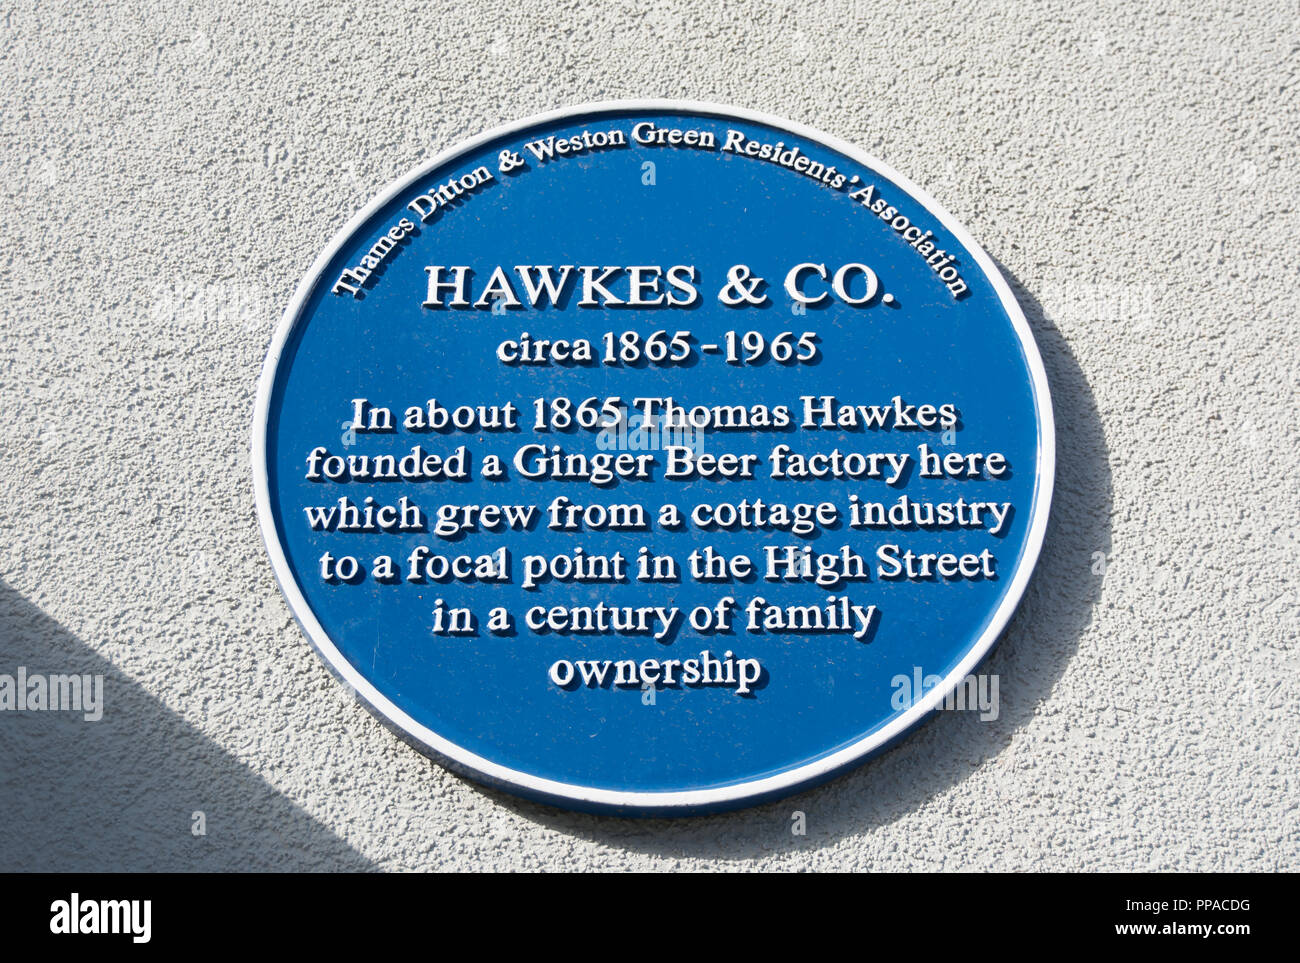 thames ditton and weston green residents association blue plaque marking the site of hawkes & co ginger beer factory, thames ditton, surrey, england Stock Photo